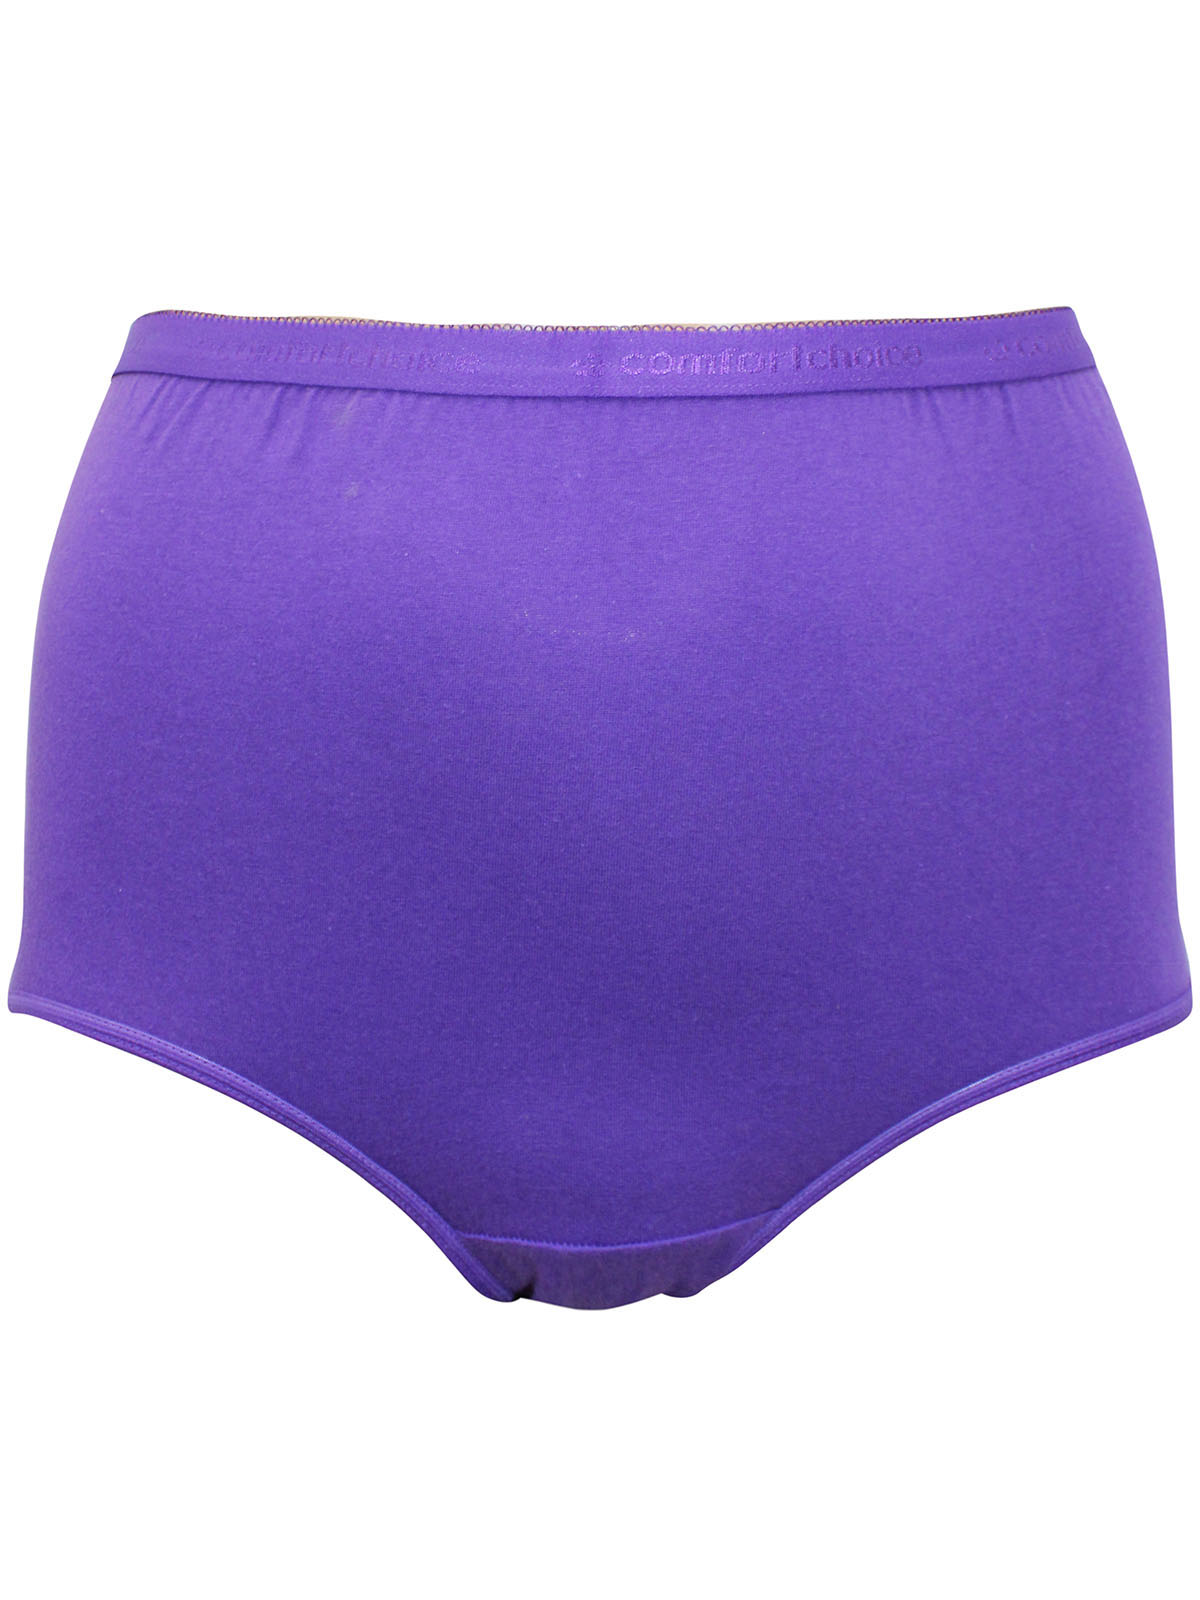 New Luxurious Comfort Choice 100% Nylon Full Coverage Brief Panty Soft Pink  Size 7 lg -  Canada